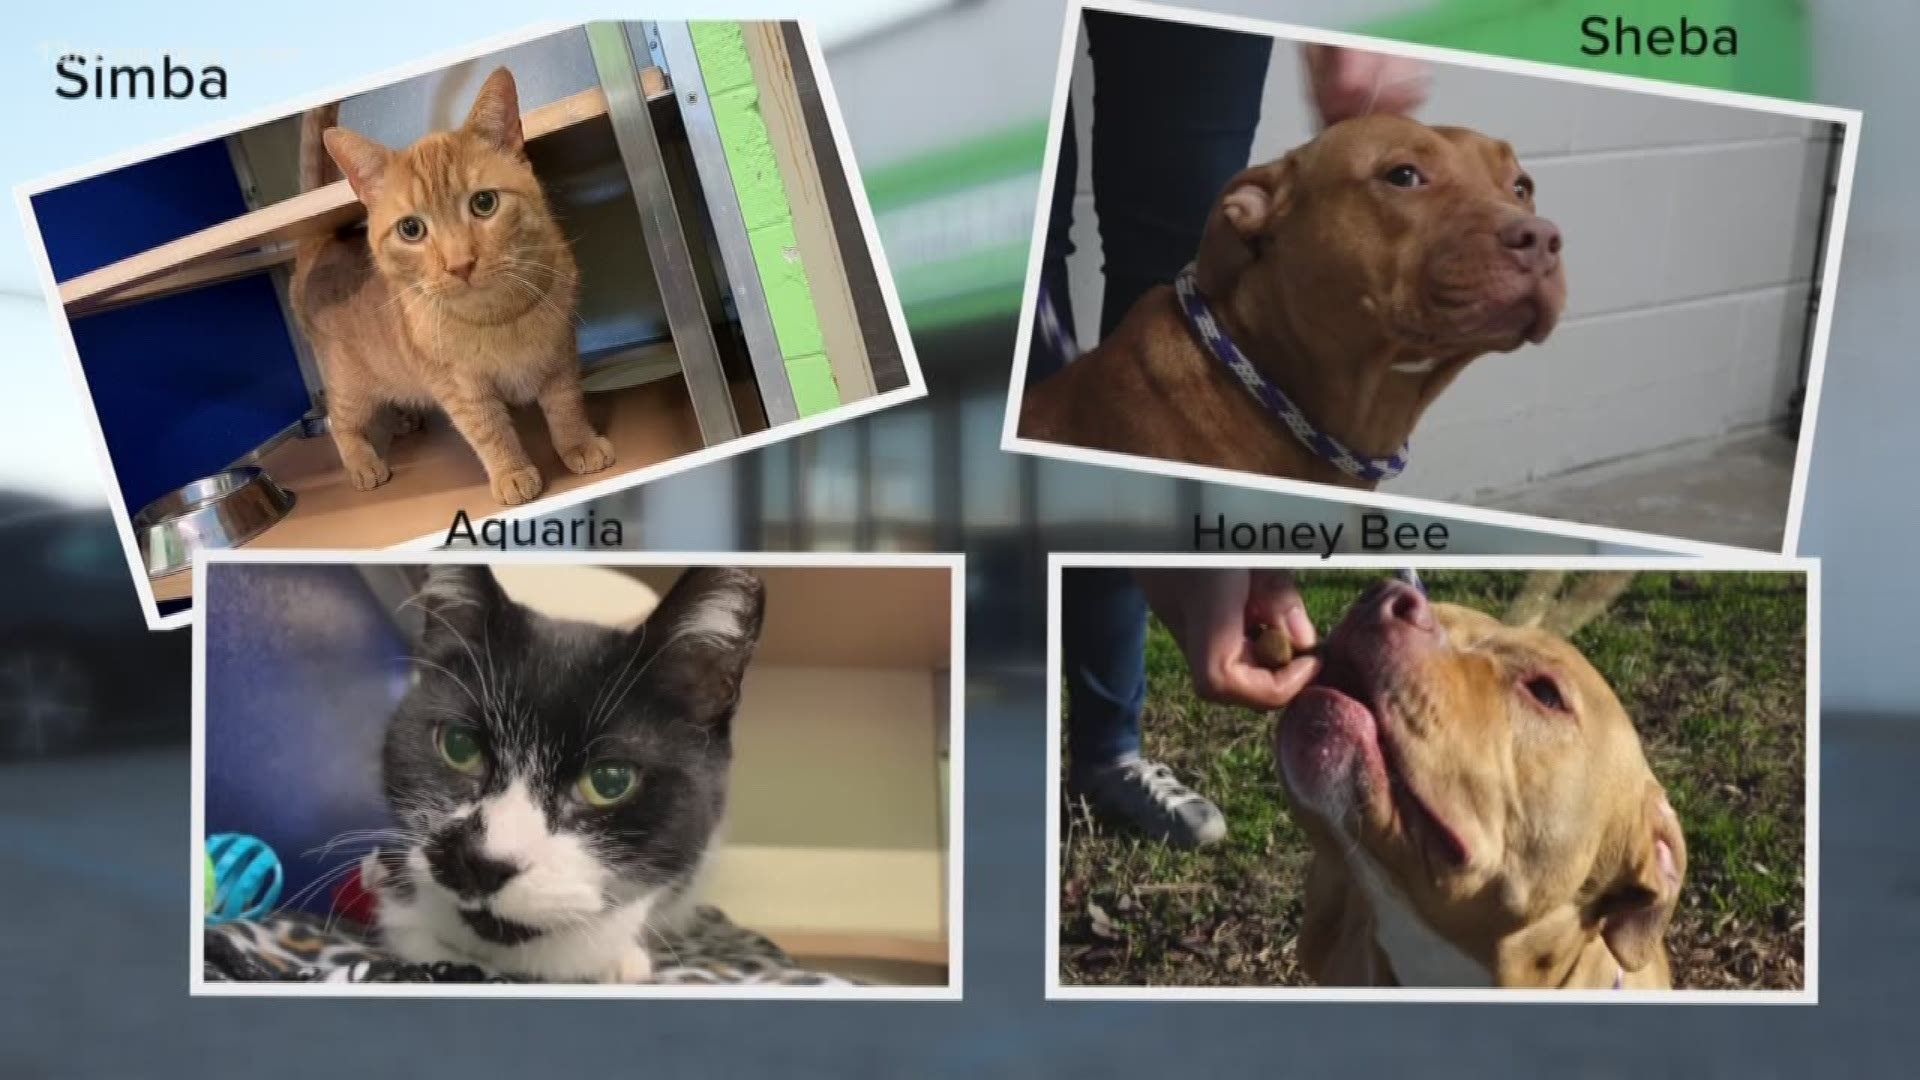 We're taking a look at some furry pals who need a forever home at the Norfolk Animal Care and Adoption Center.